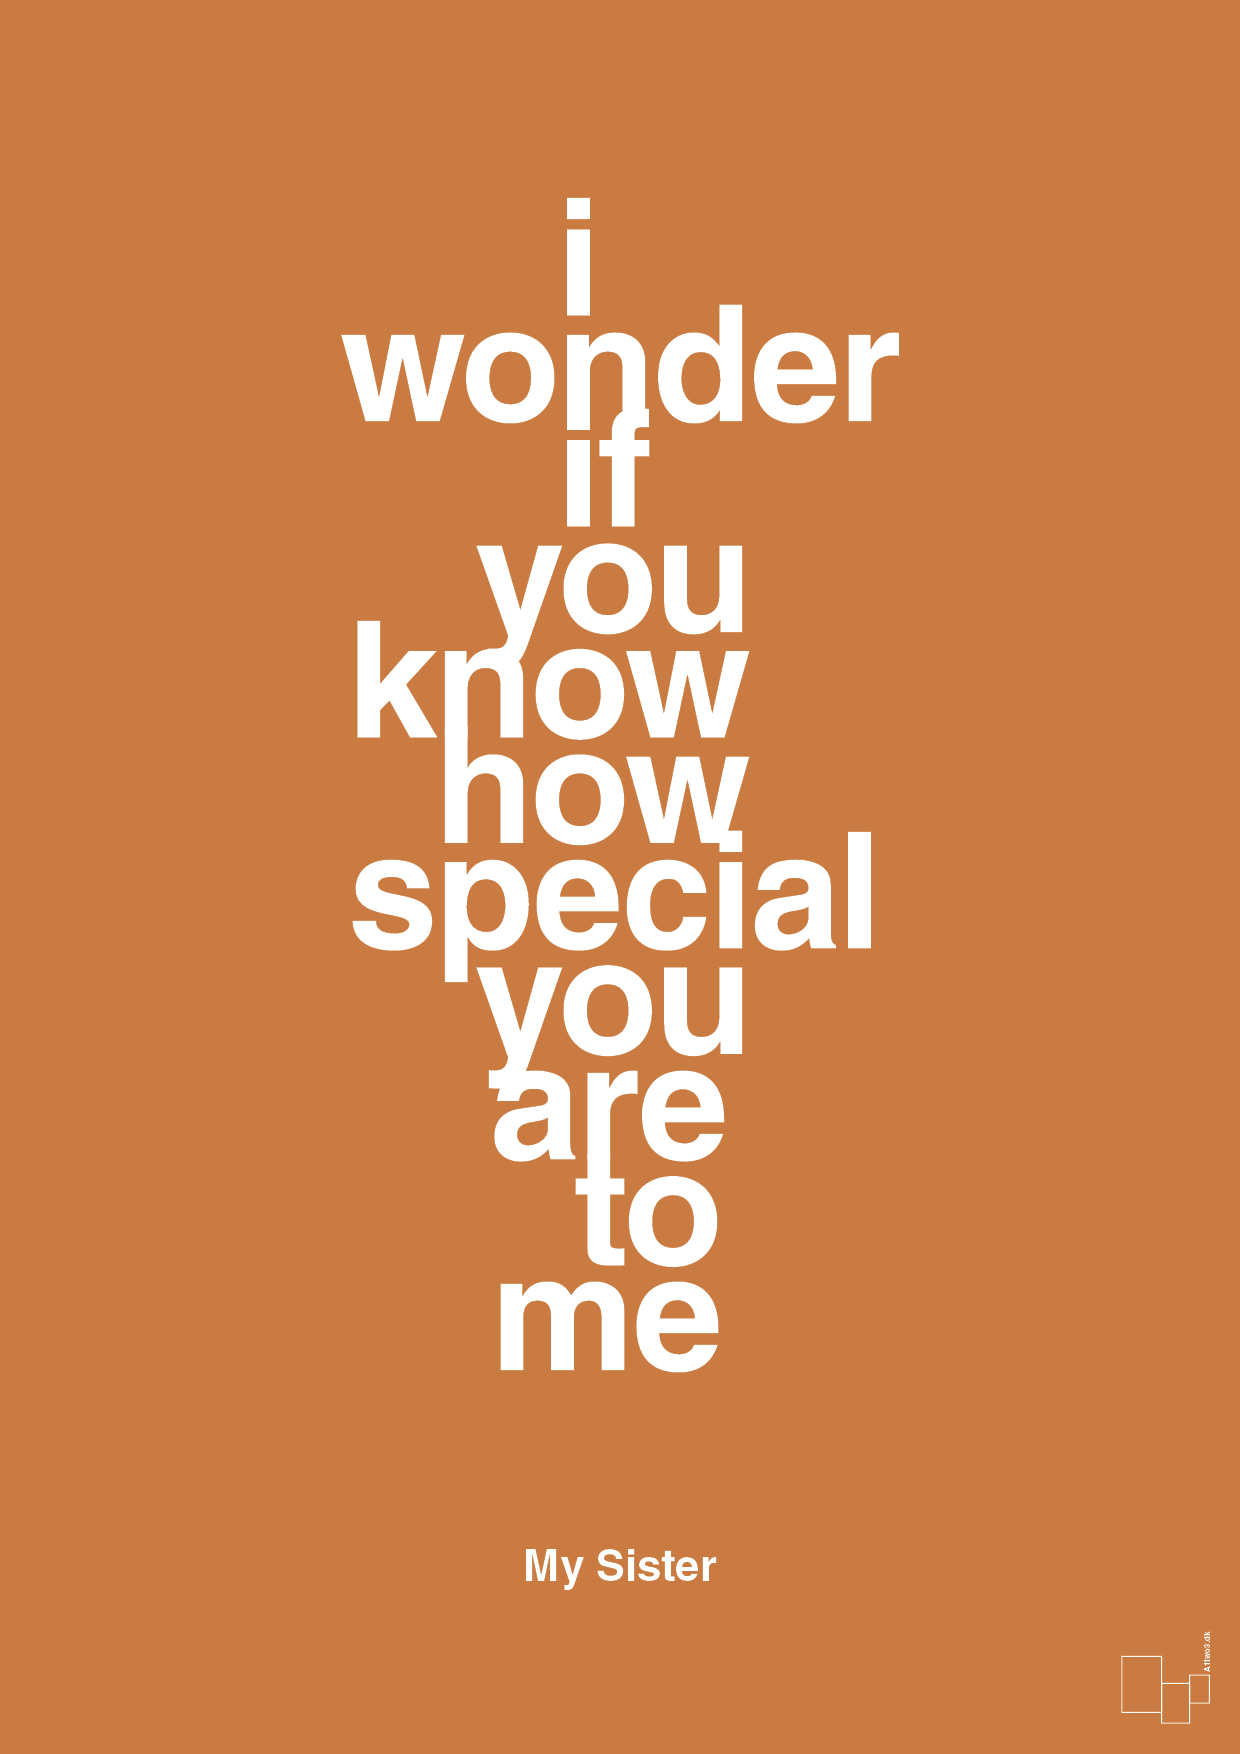 my sister - i wonder if you know how special you are to me - Plakat med Citater i Rumba Orange